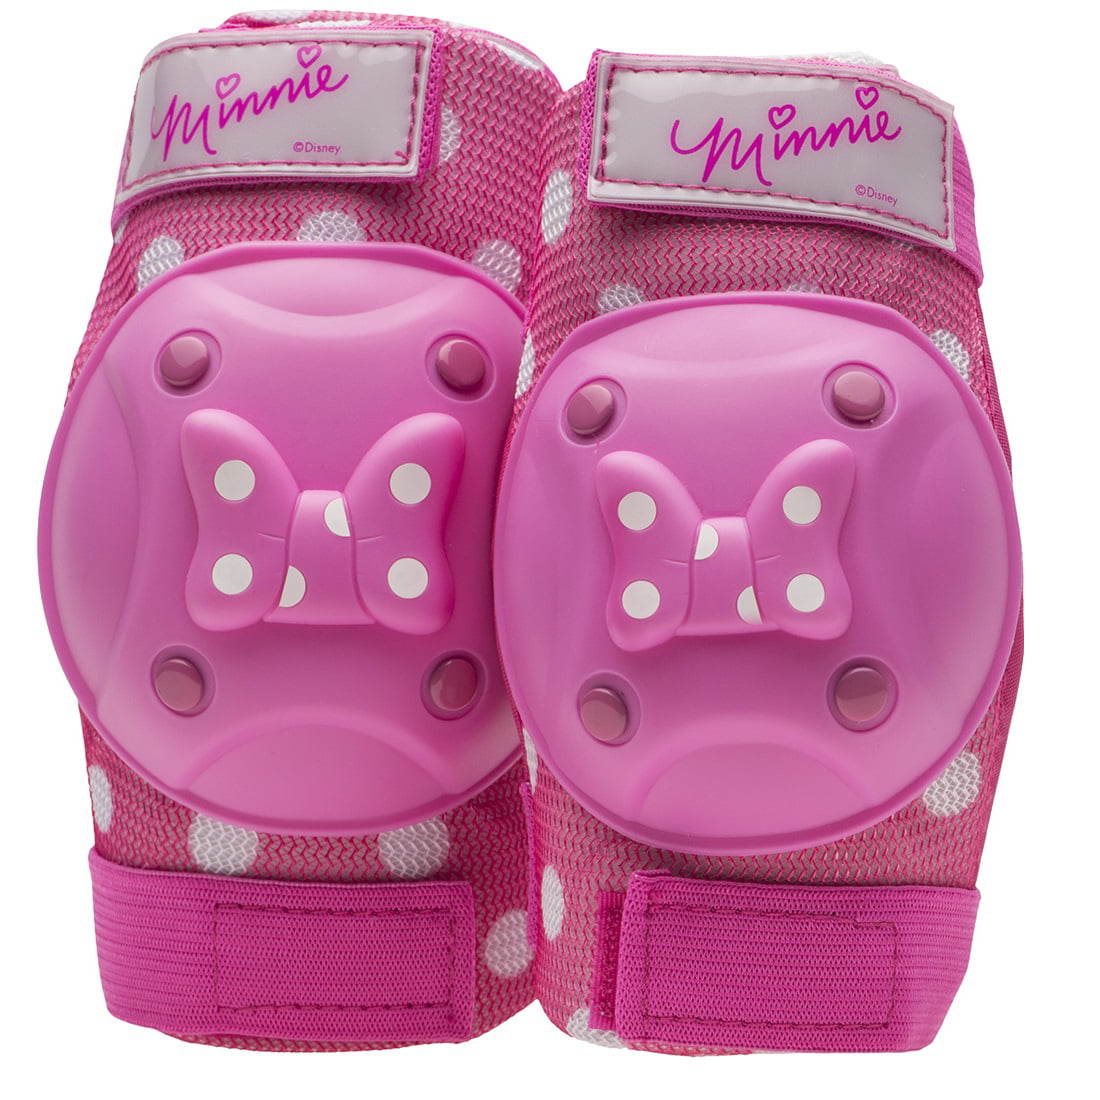 Details about   Disney Minnie Mouse Helmet Toddler 3 And Knee And Elbow Pads W/ Bell